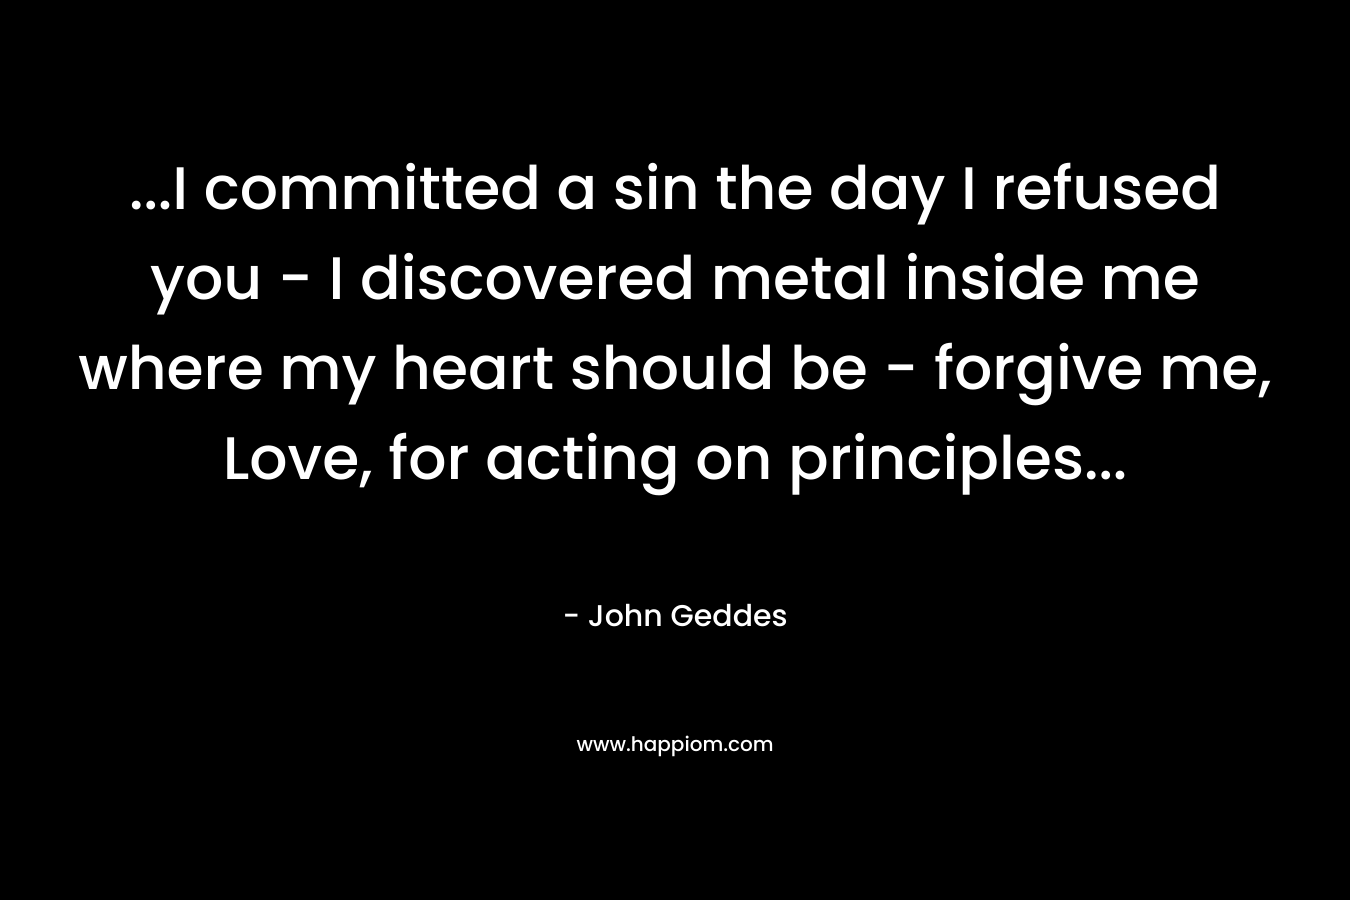 ...I committed a sin the day I refused you - I discovered metal inside me where my heart should be - forgive me, Love, for acting on principles...